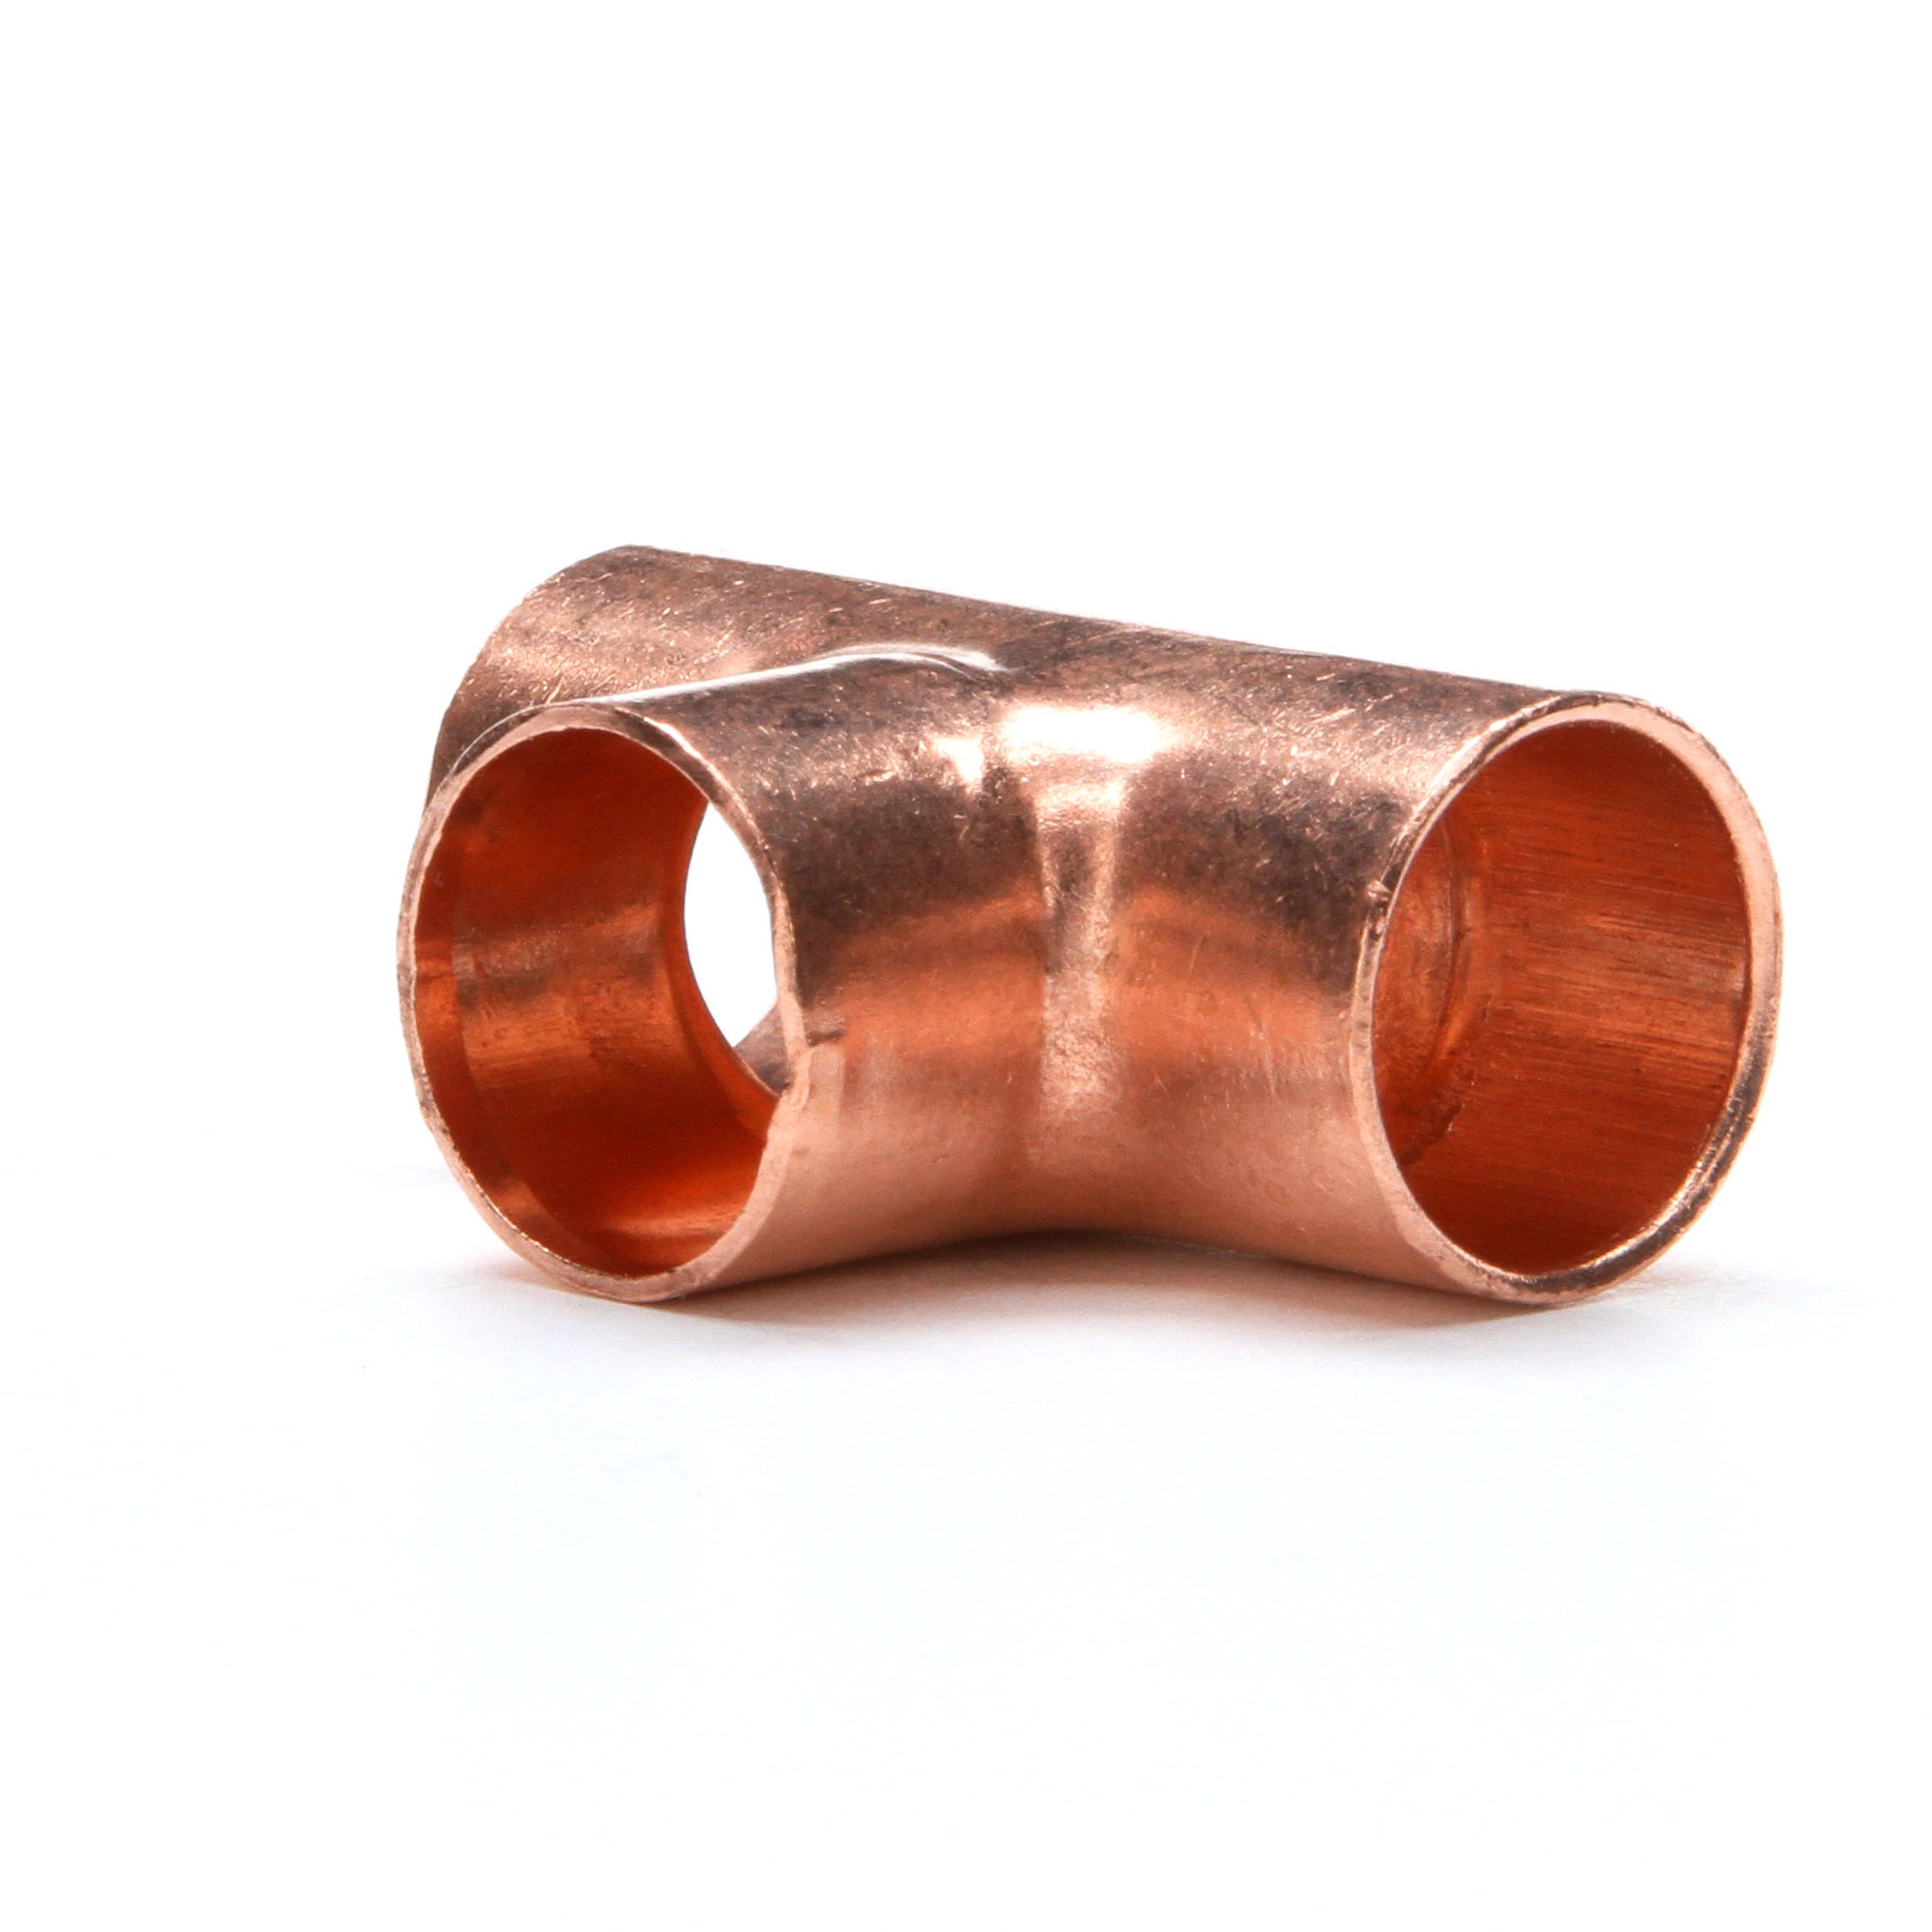 10 PACK End Feed Copper Fittings 45 Degree Elbow Size 15mm/copper pipe/tube 